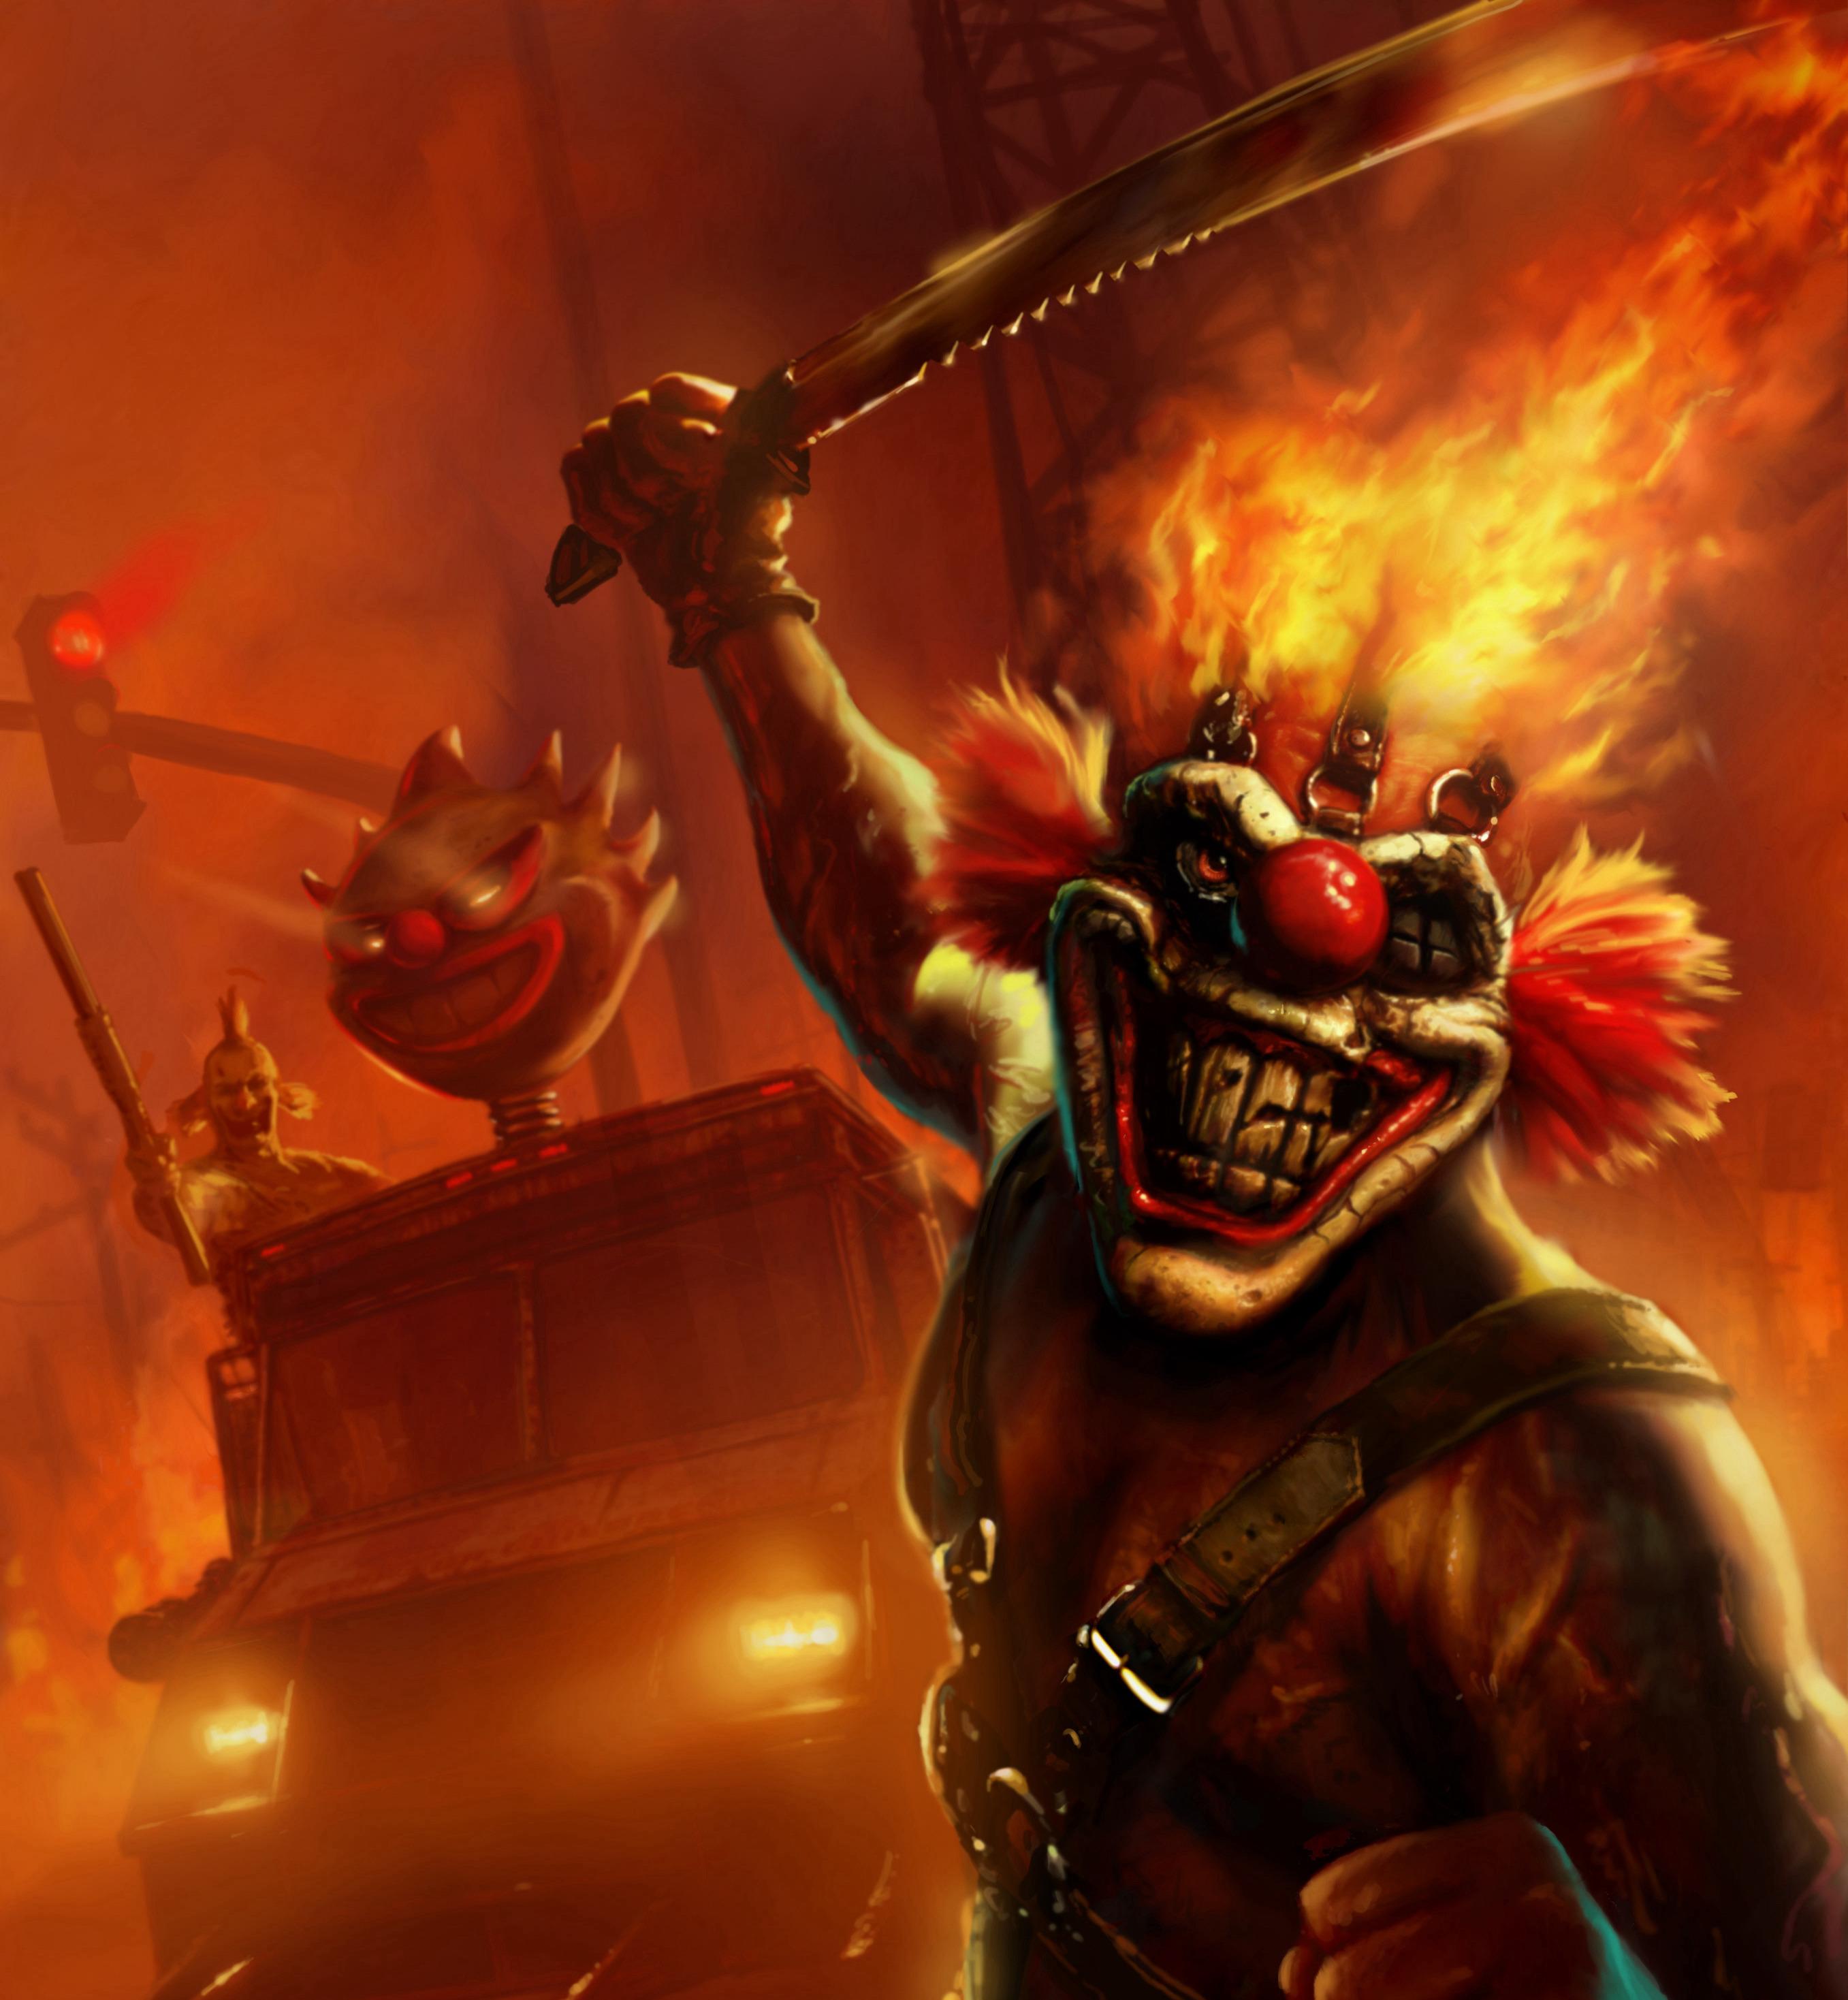 Twisted Metal' Trailer, Release Date, Plot, Cast, and More